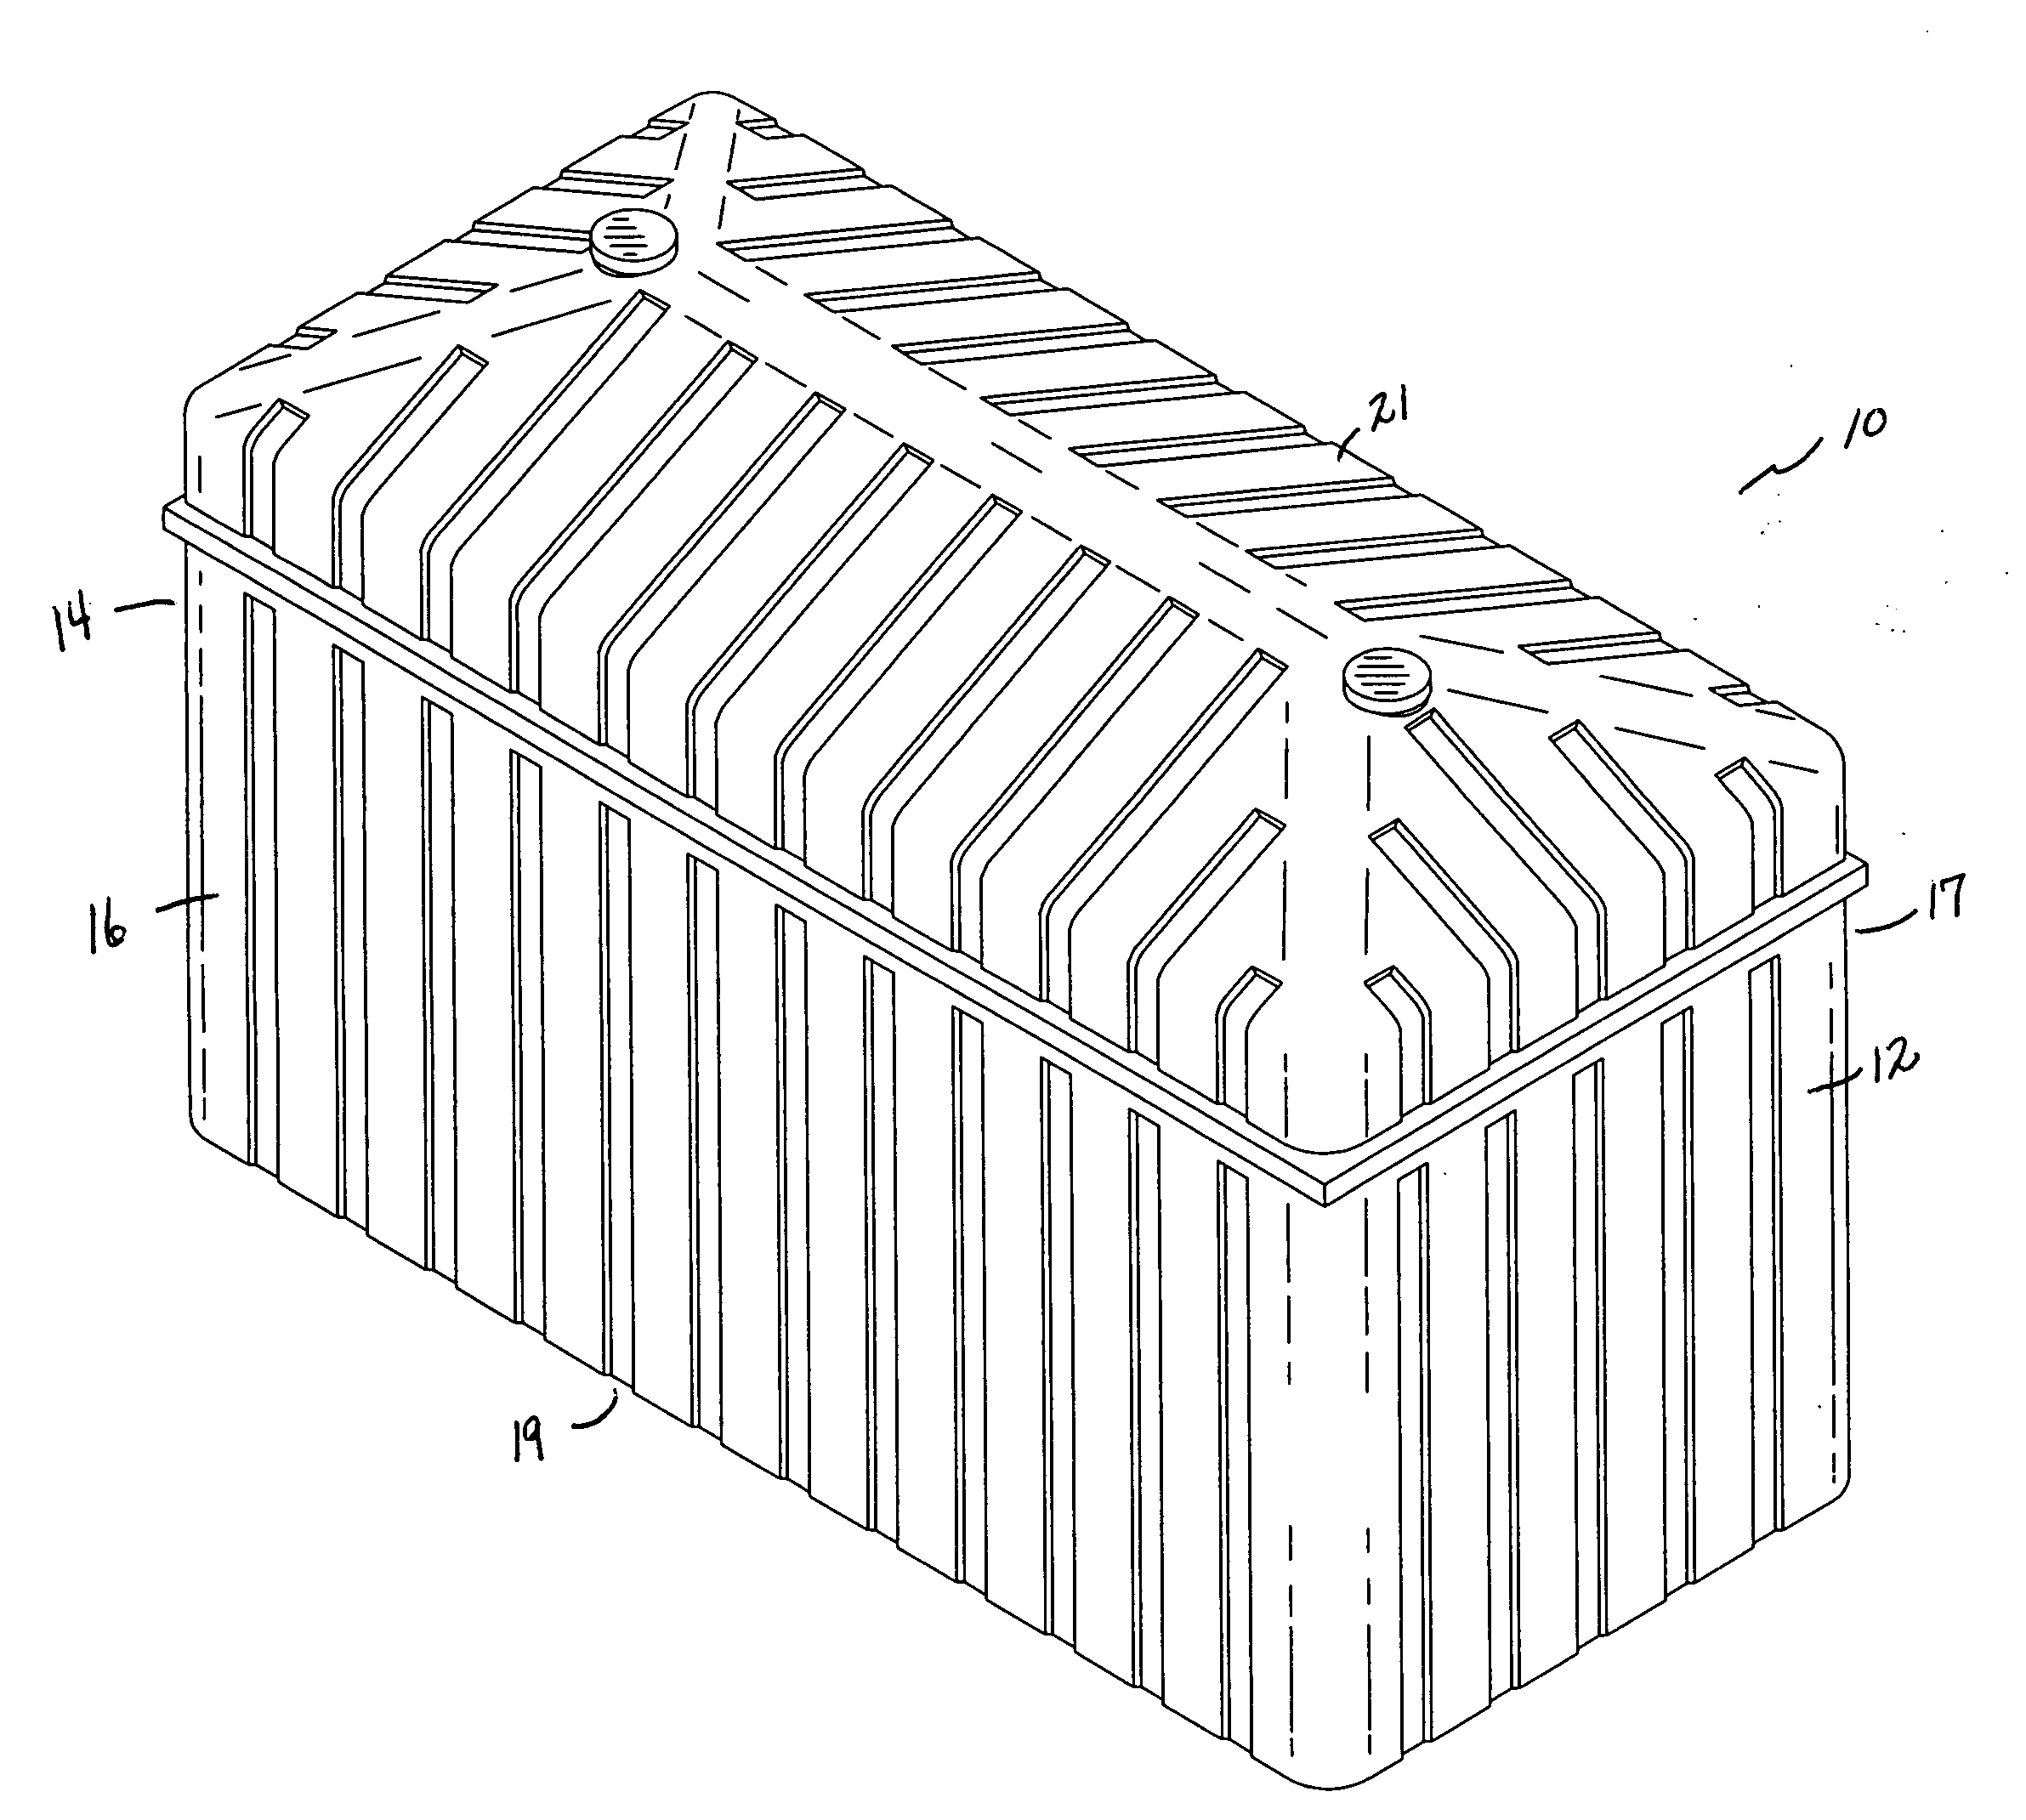 Secondary containment system for DEF storage container